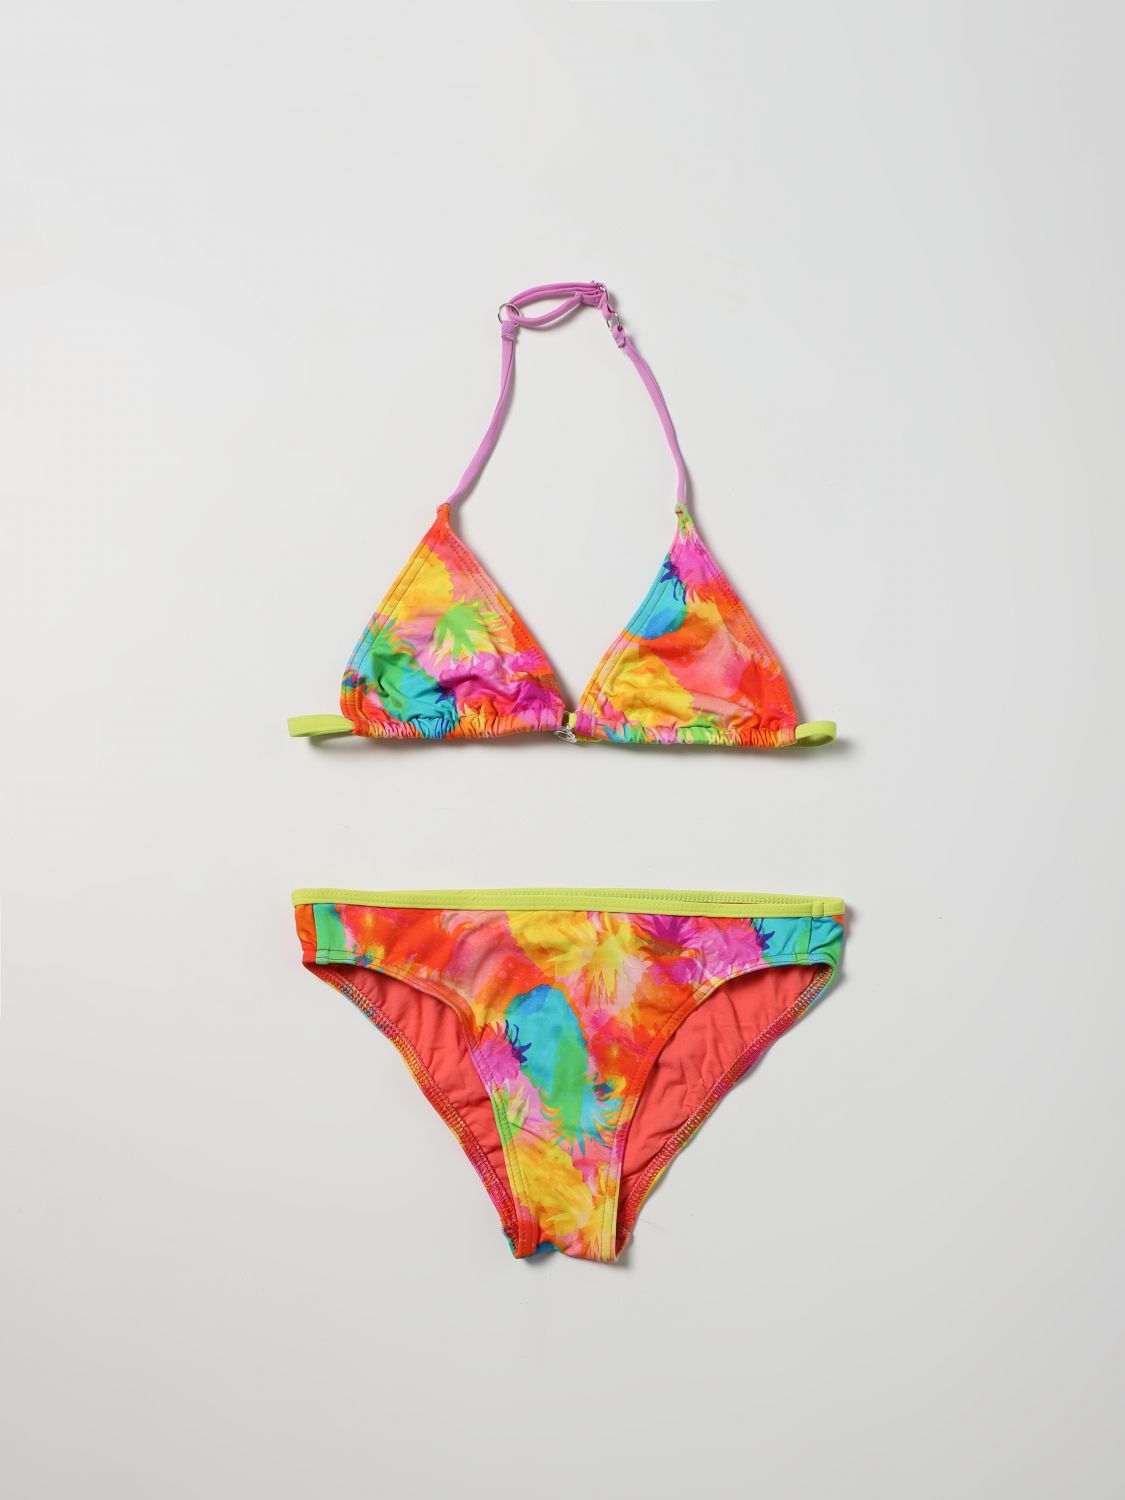 Banana Moon Outlet: swimsuit for girls - Coral | Banana Moon swimsuit ...